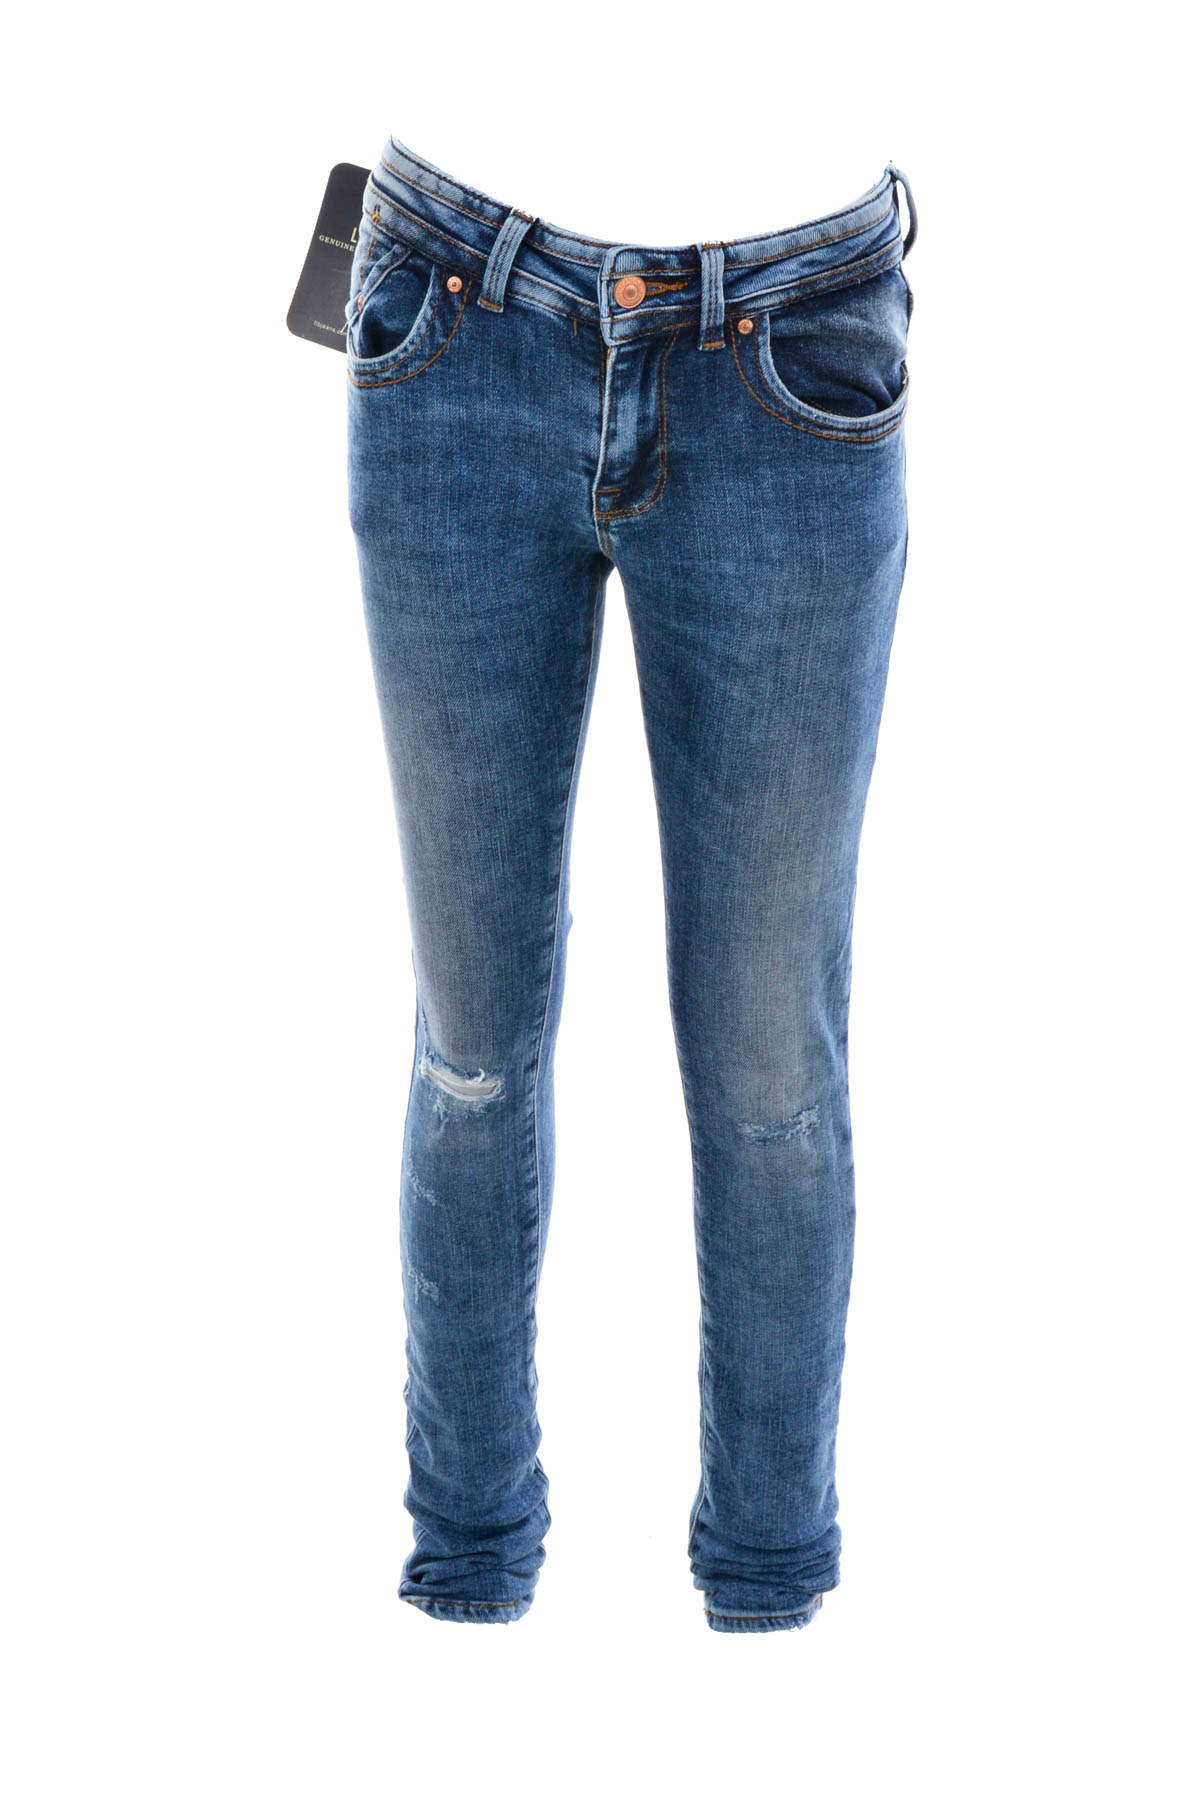 Girl's jeans - LTB - 0